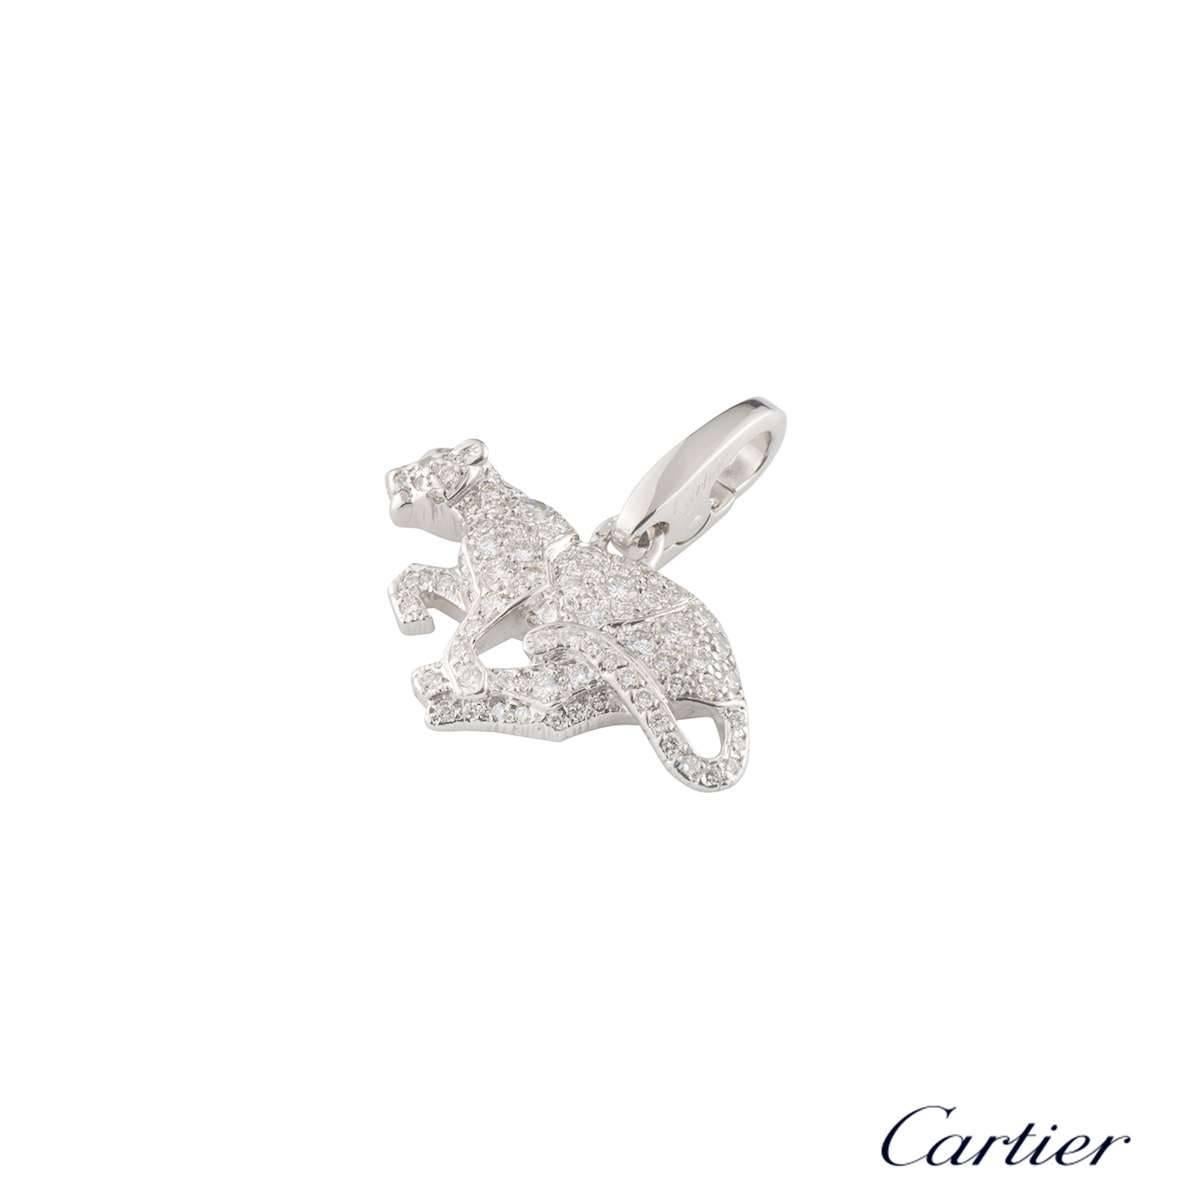 A beautiful 18k white gold diamond Cartier charm. The charm comprises of a panthere motif encrusted with 97 round brilliant cut diamonds with a total weight of approximately 1.26ct, G colour and VS clarity. The charm features a lobster clasp and